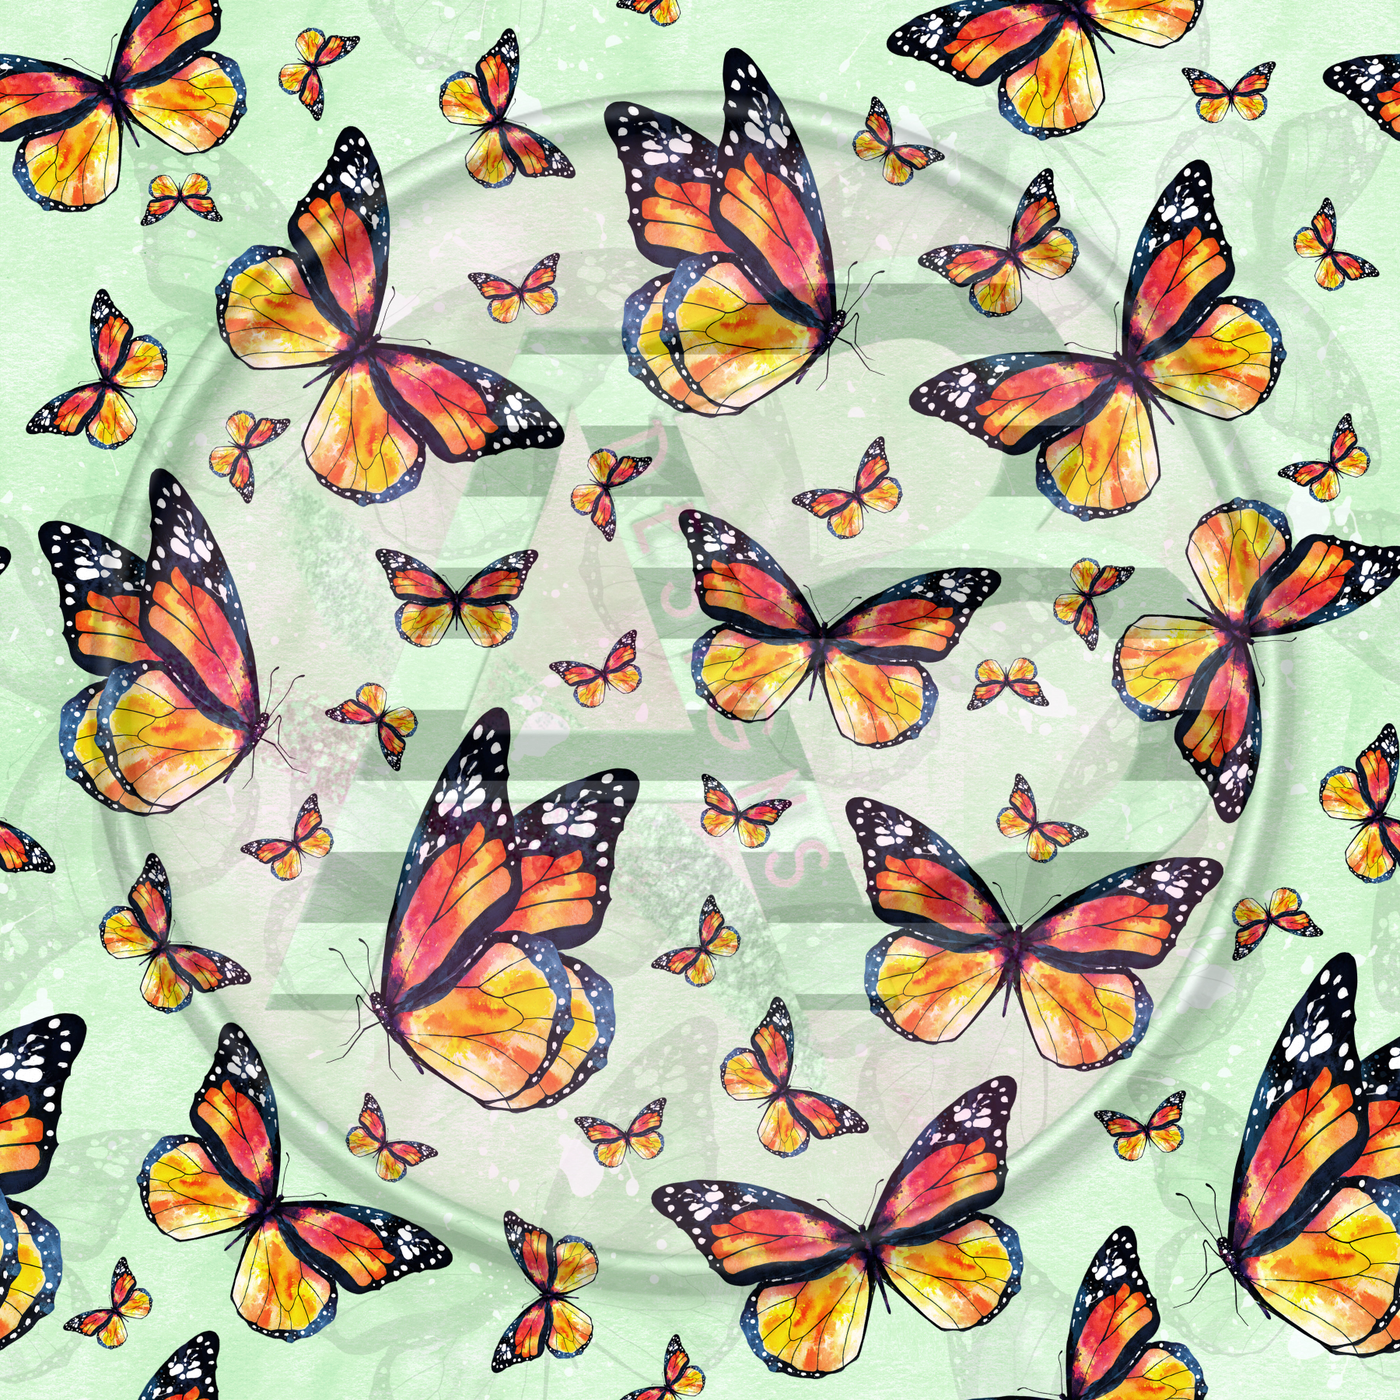 Adhesive Patterned Vinyl - Butterfly 06